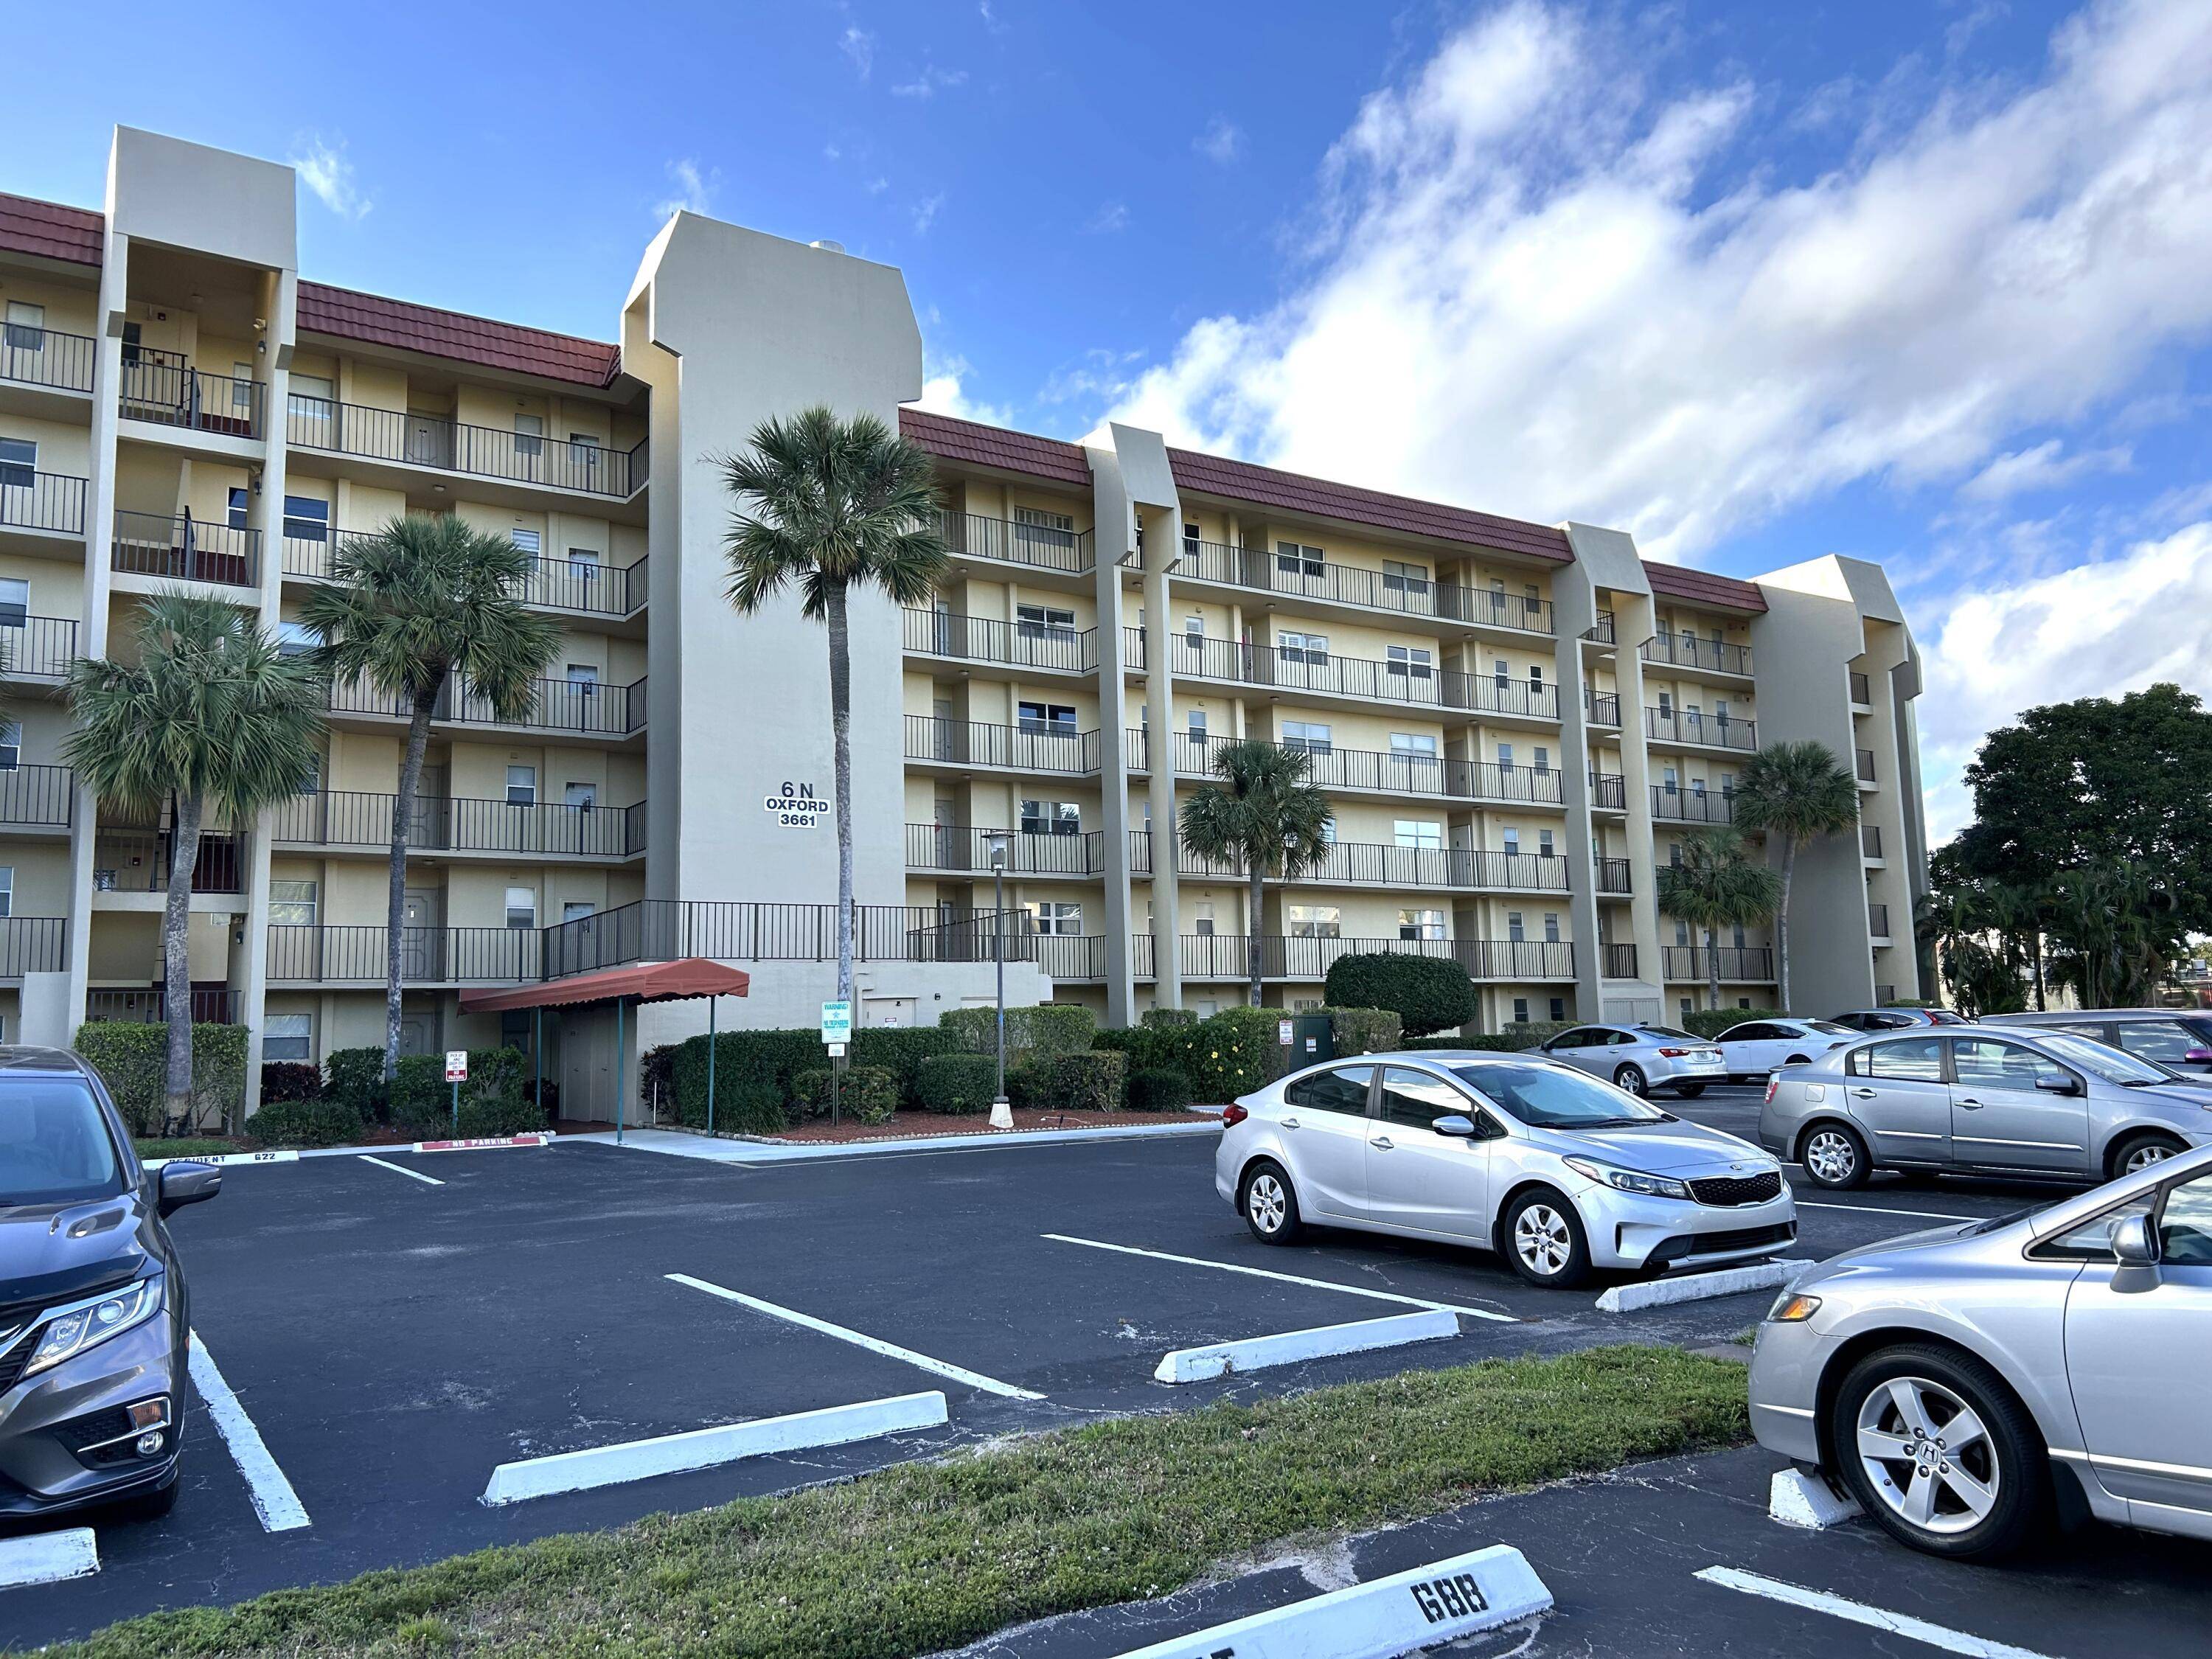 Exquisitely renovated 2 bedroom 2 bath condo located in the Poinciana Country Club.